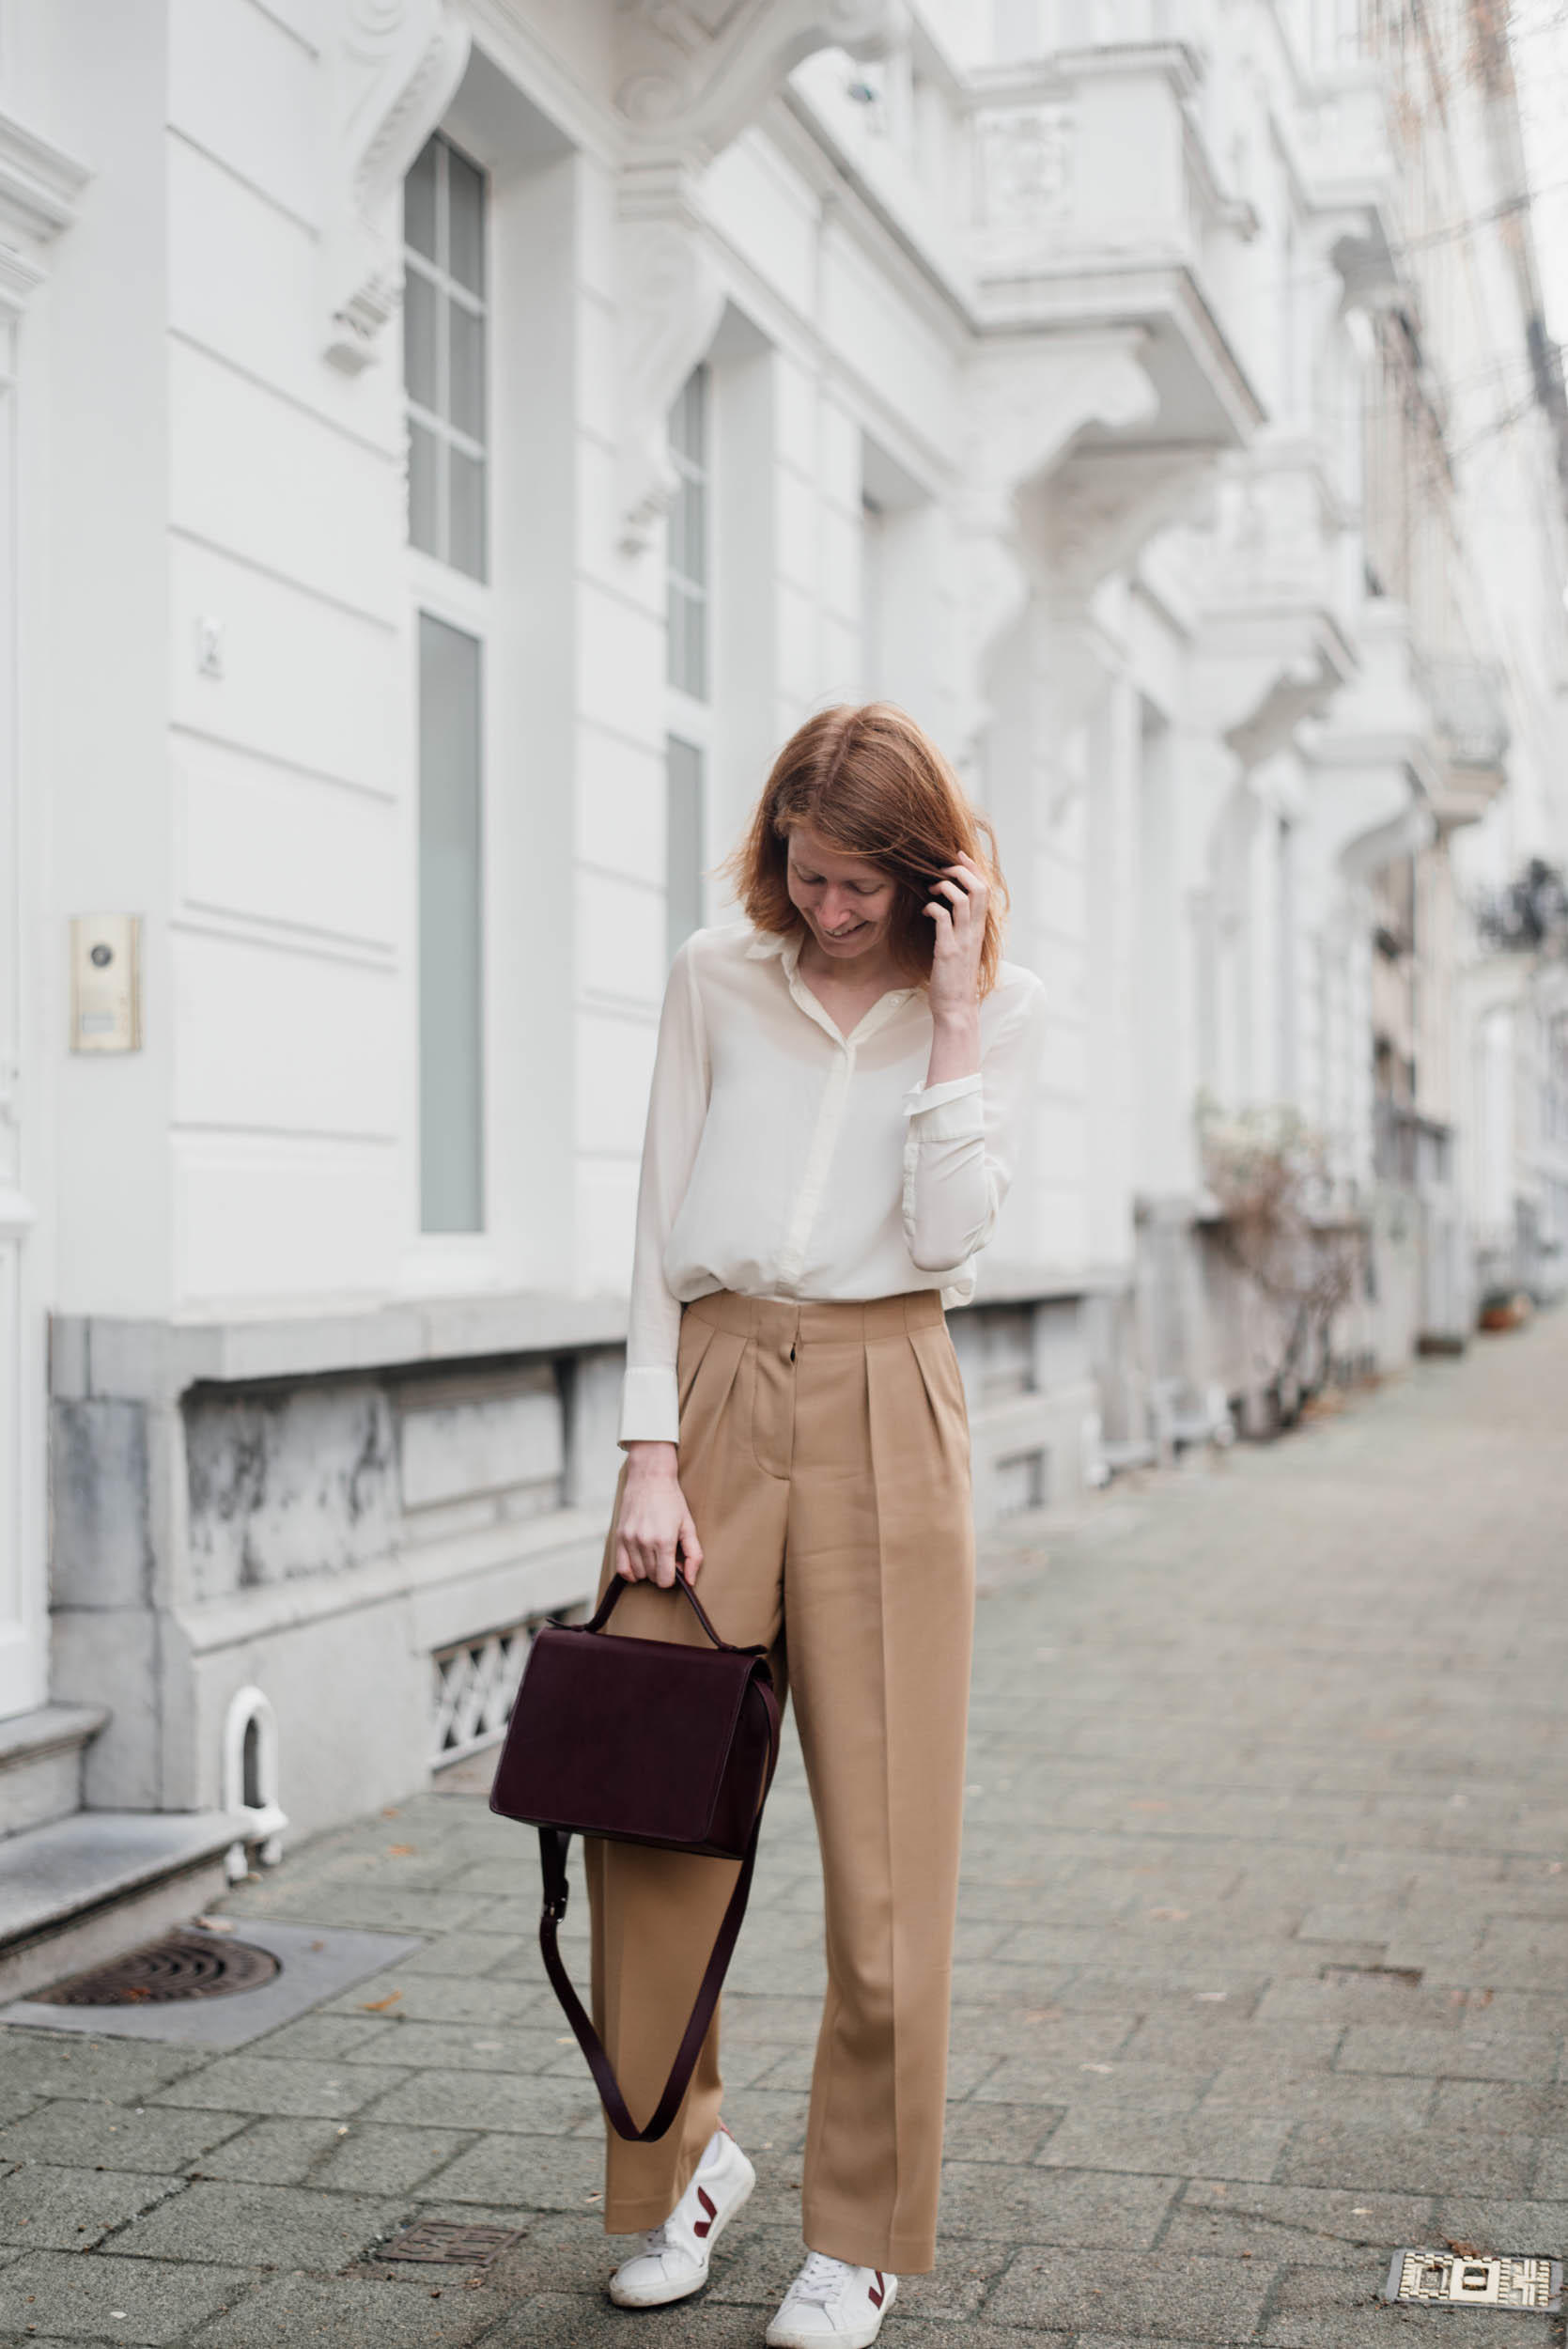 Footwear to co-ordinate with palazzo pants